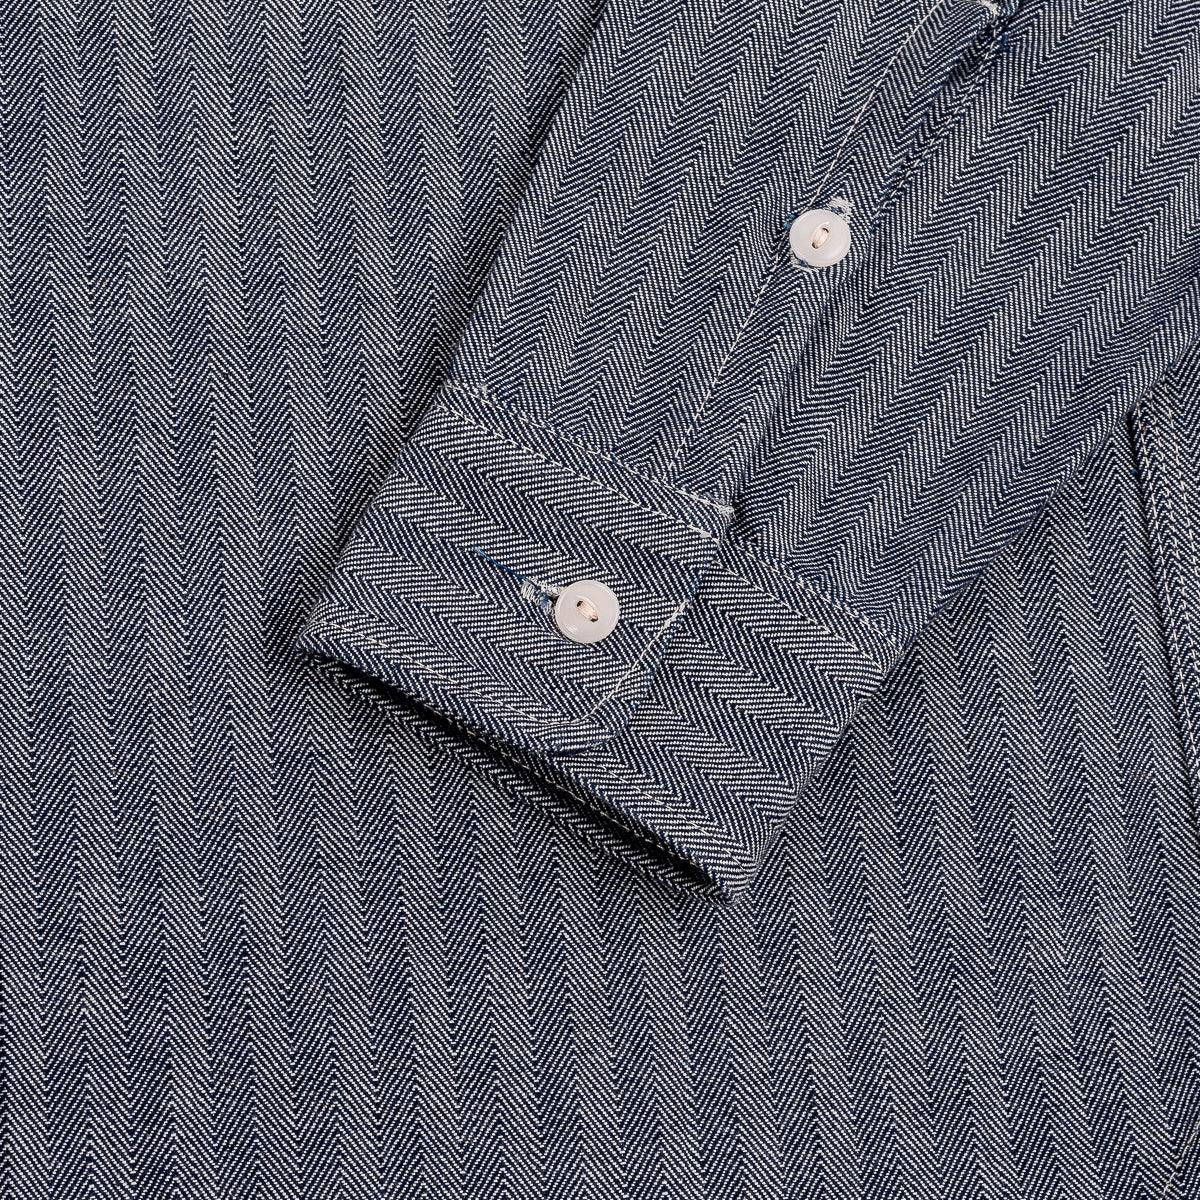 Image showing the IHSH-308-IND - 12oz Herringbone Work Shirt Indigo which is a Shirts described by the following info IHSALE, Iron Heart, Released, Shirts, Tops and sold on the IRON HEART GERMANY online store